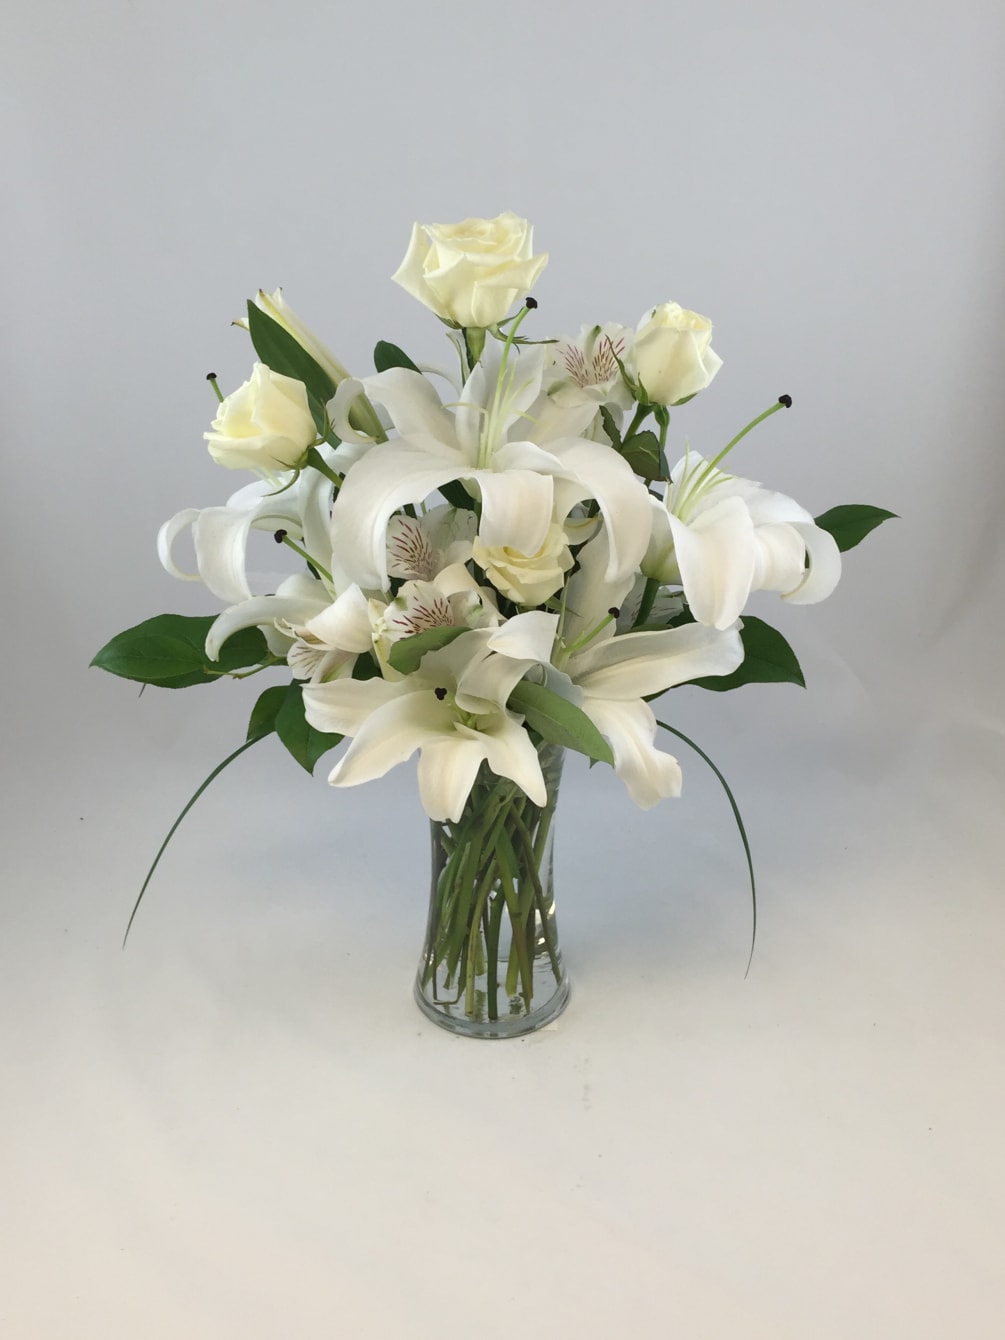 White Roses, White Roses, White Alstroemeria, Variety of greens arranged in a